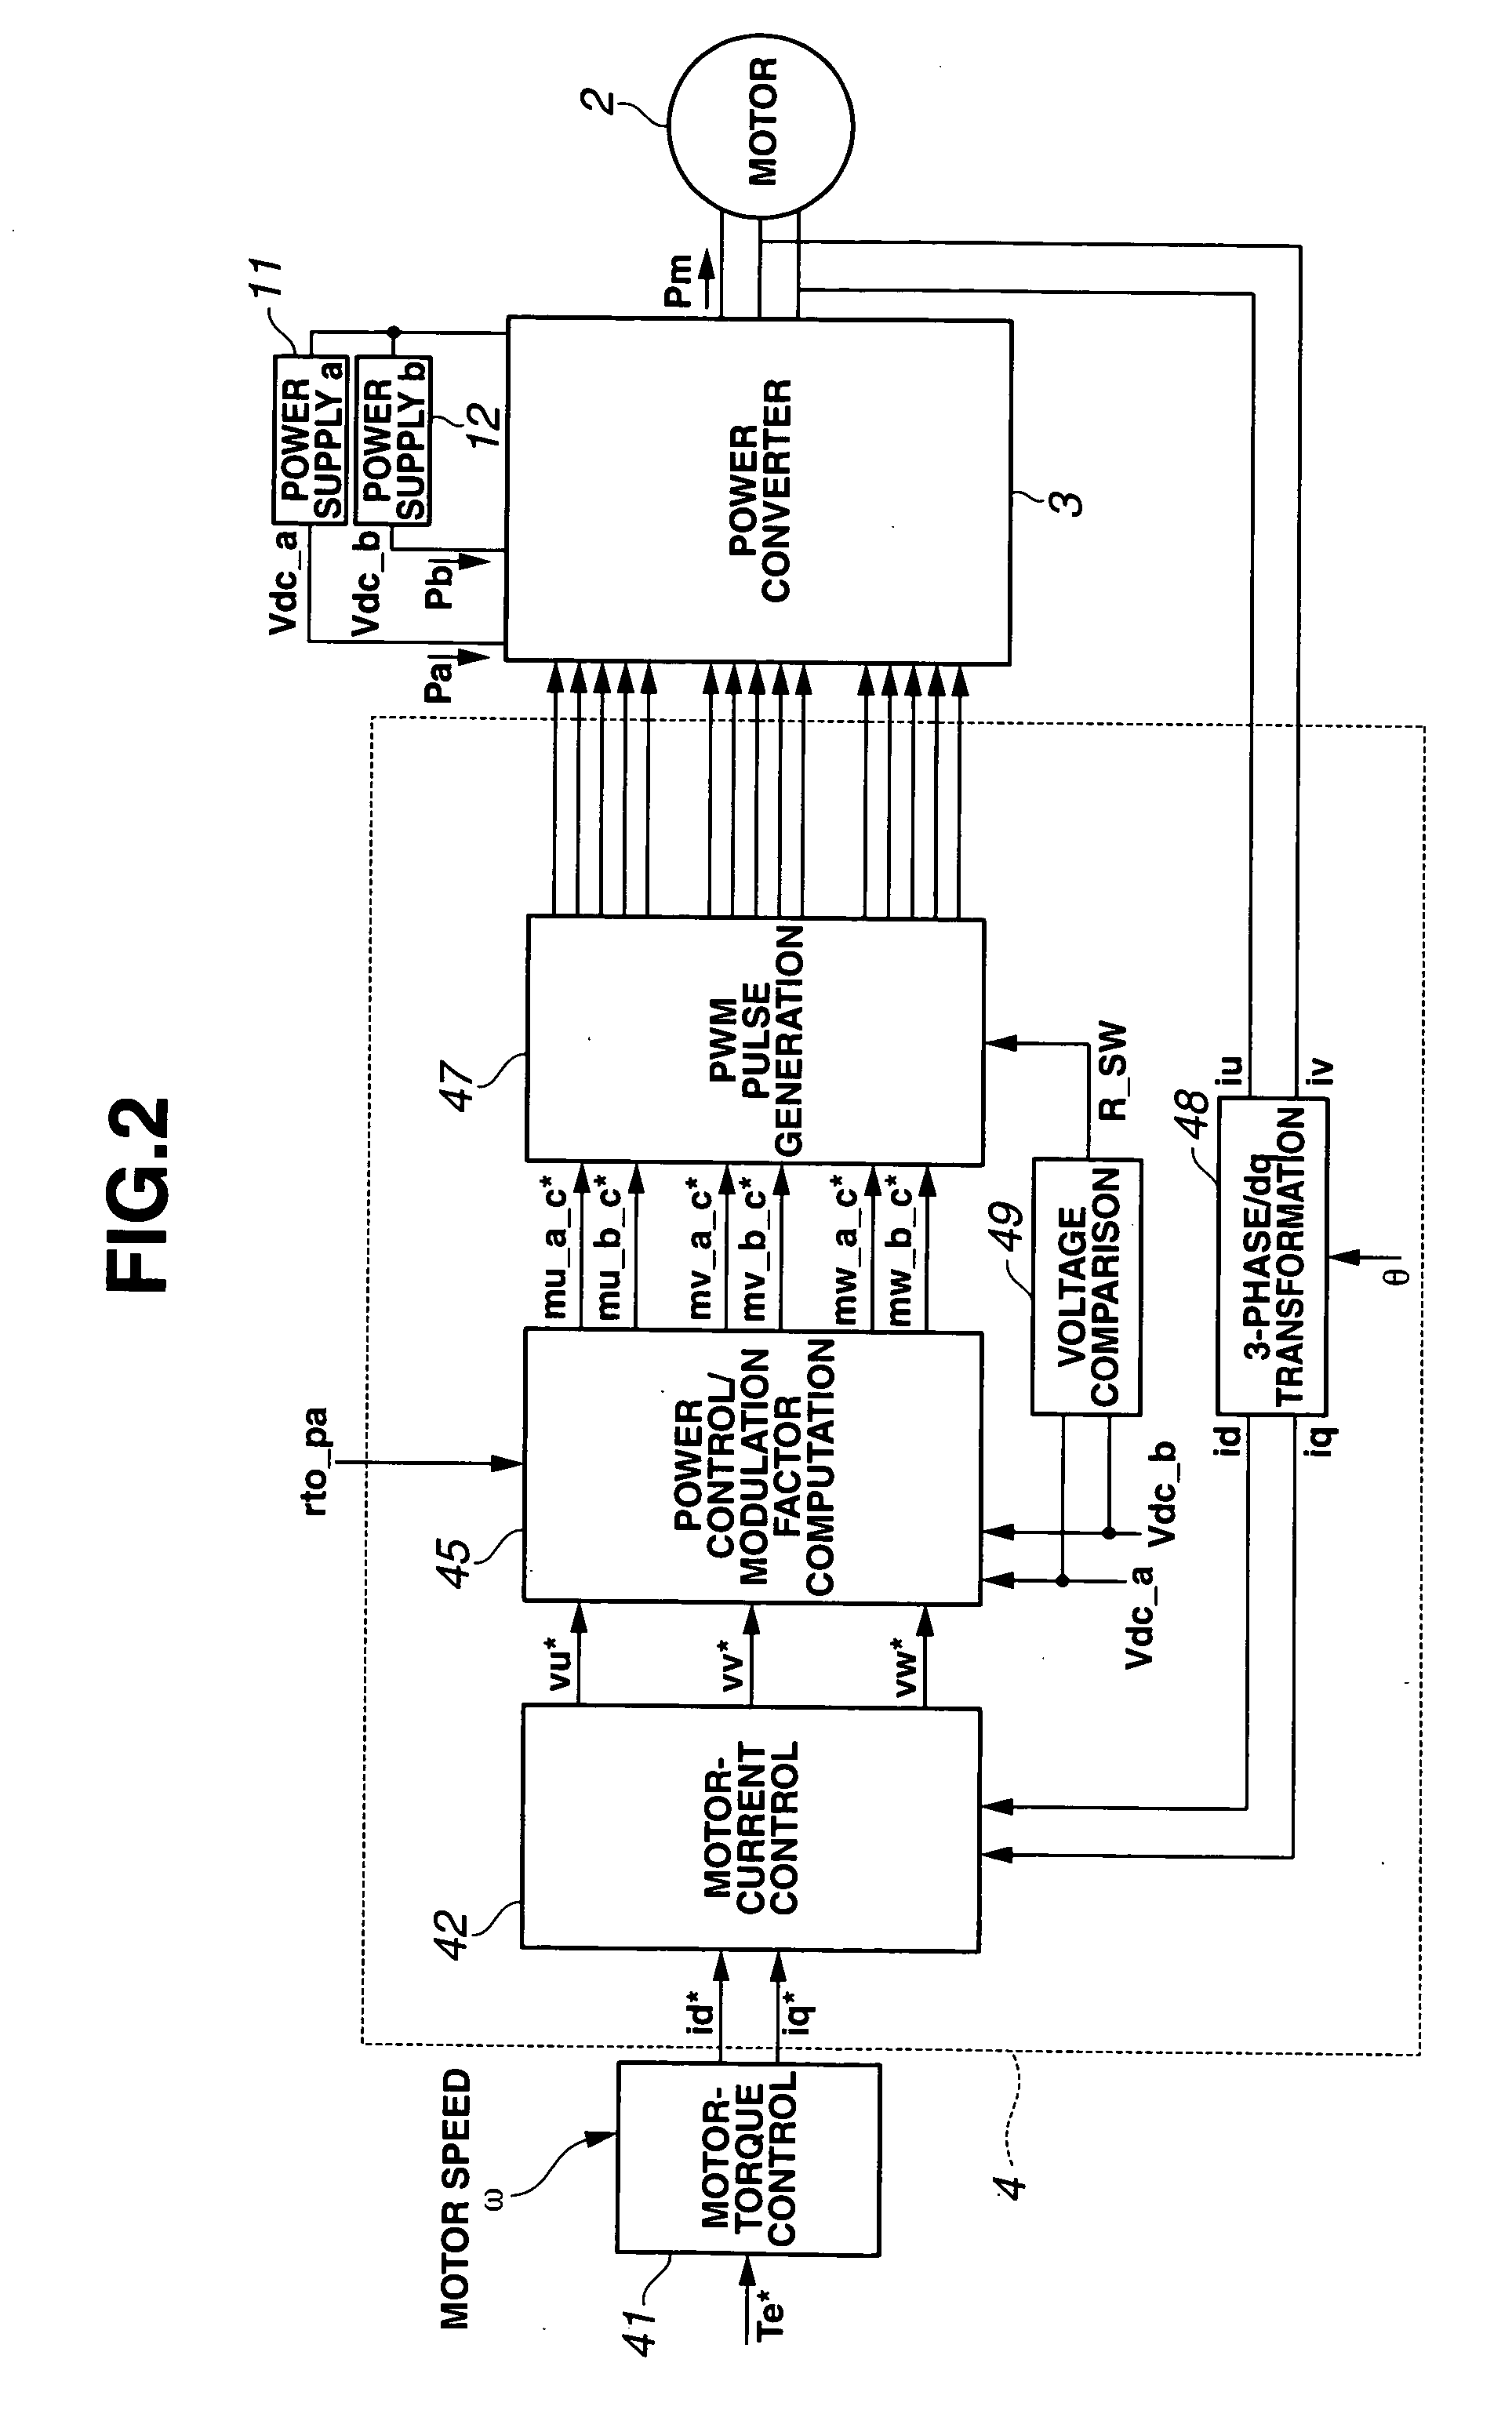 Electric power conversion apparatus for plural DC voltage sources and an AC electrical load